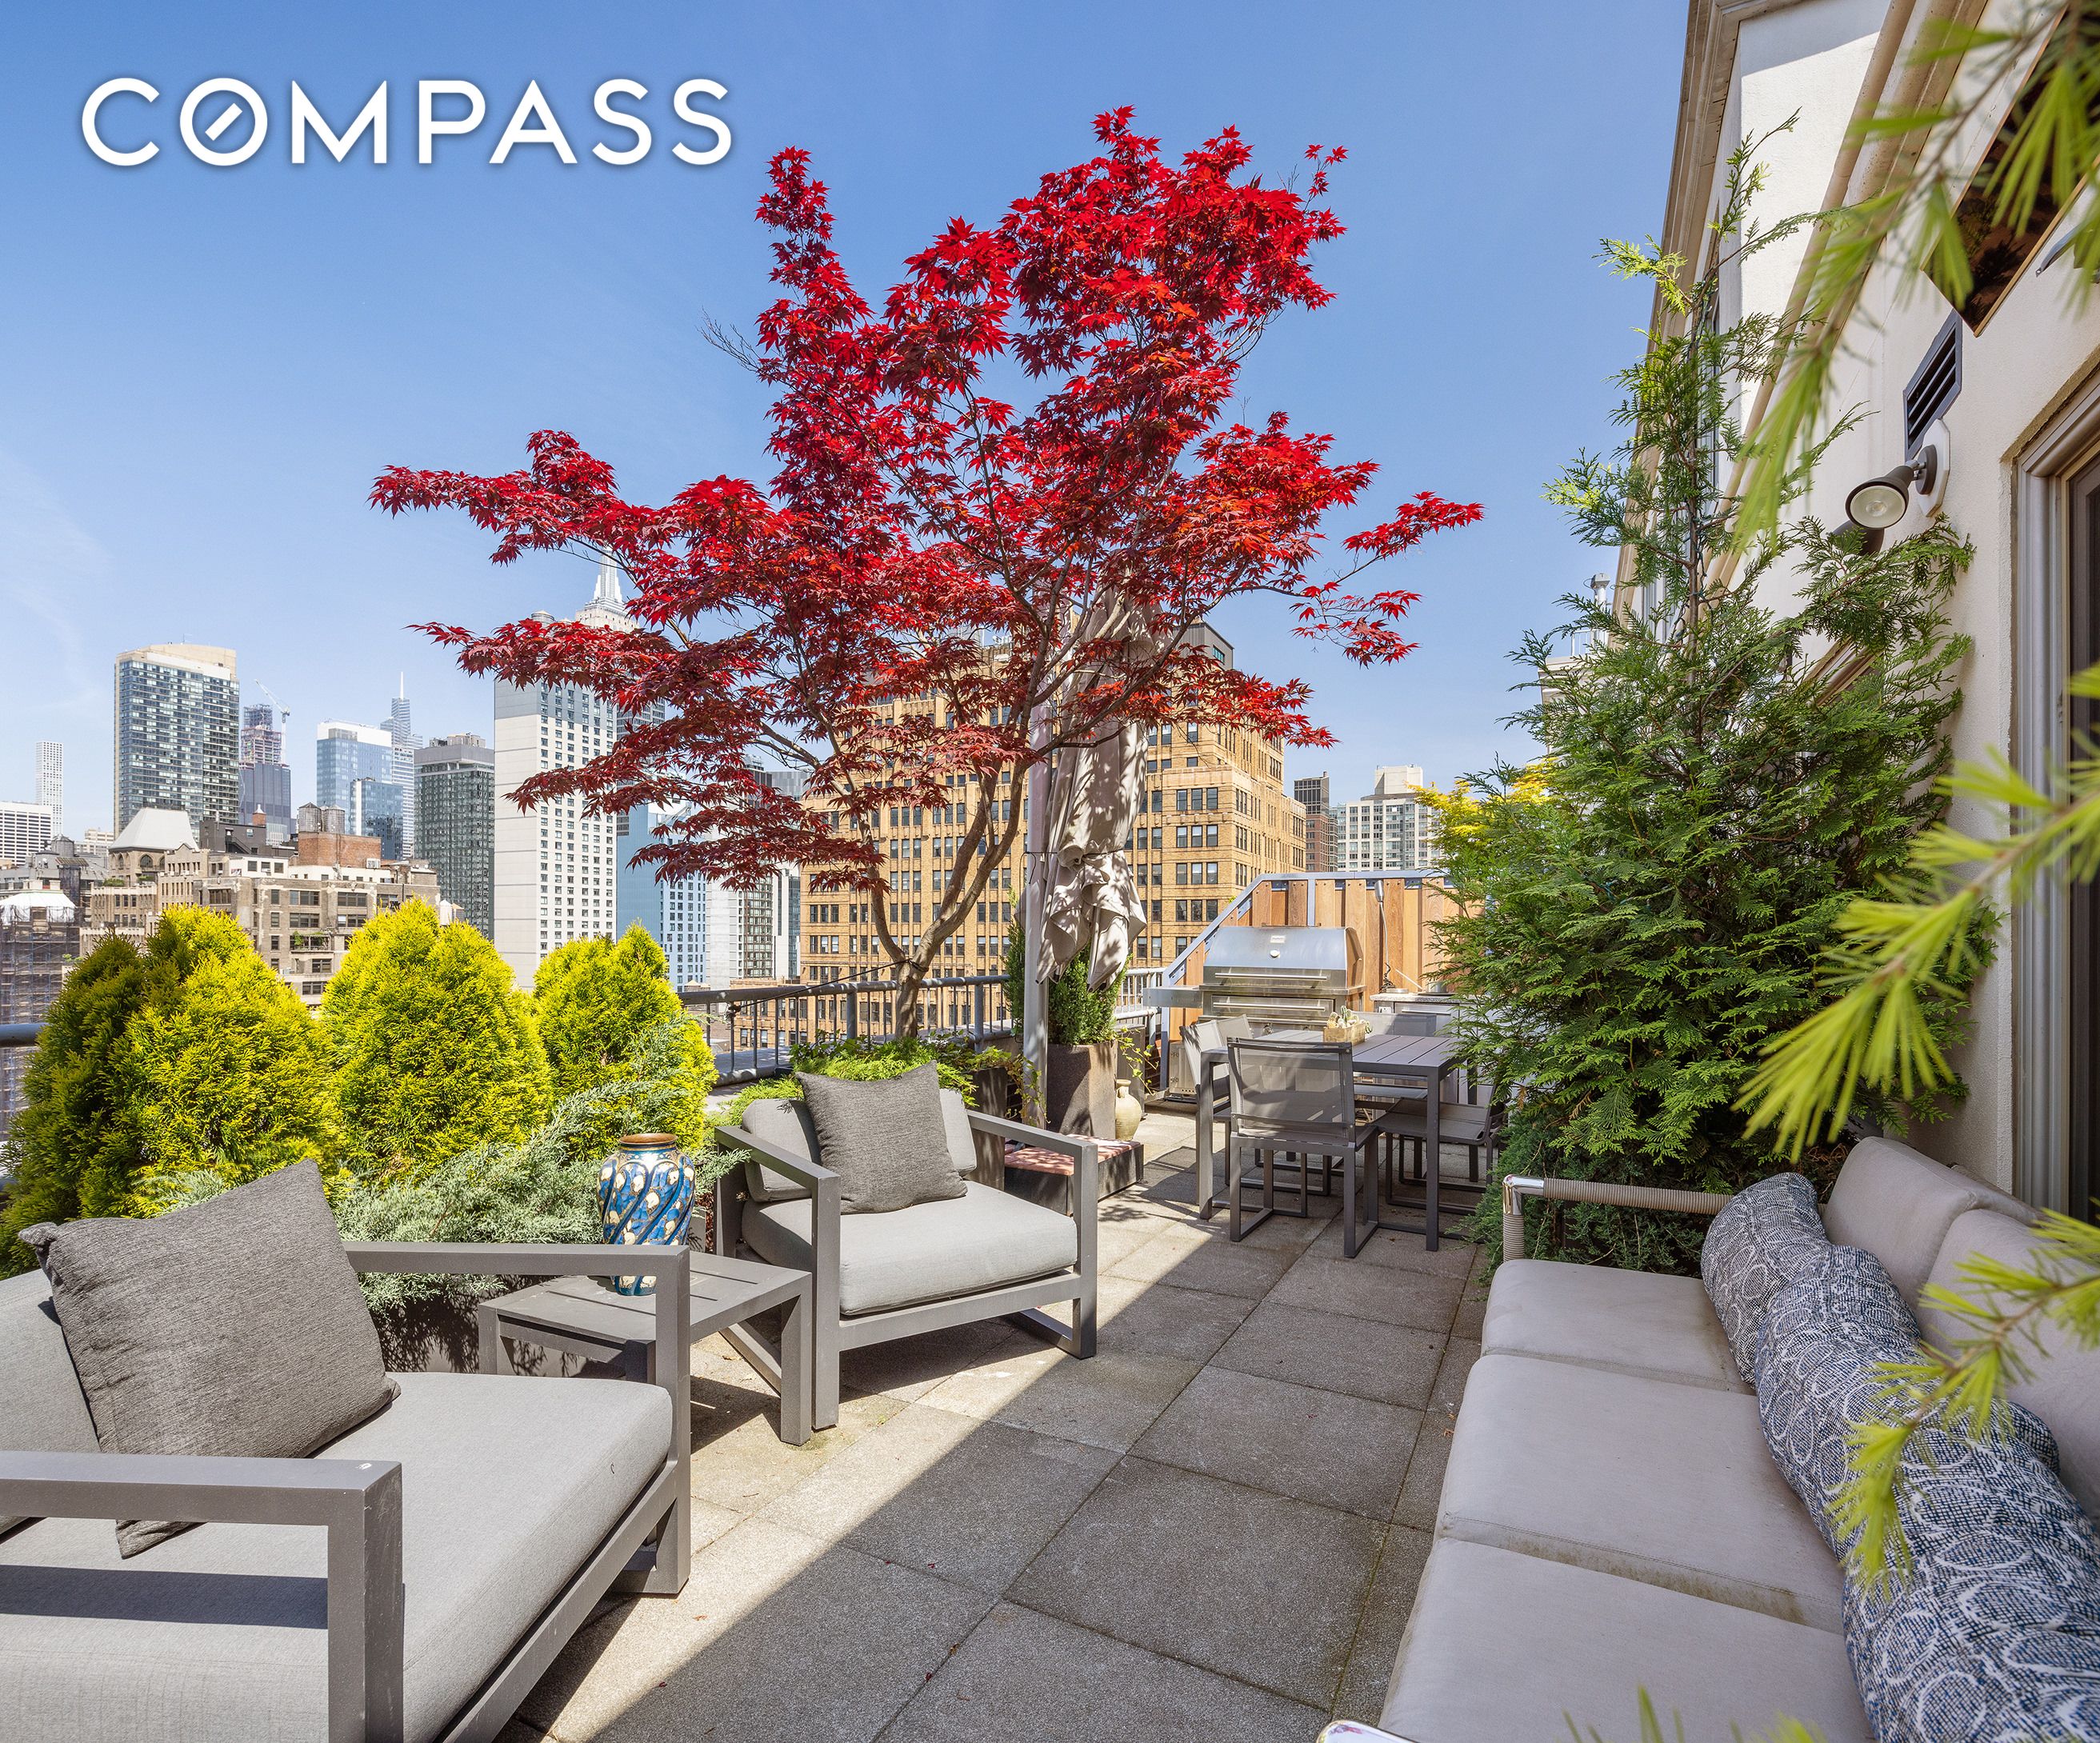 252 7th Avenue Phg, Chelsea, Downtown, NYC - 3 Bedrooms  
3 Bathrooms  
6 Rooms - 